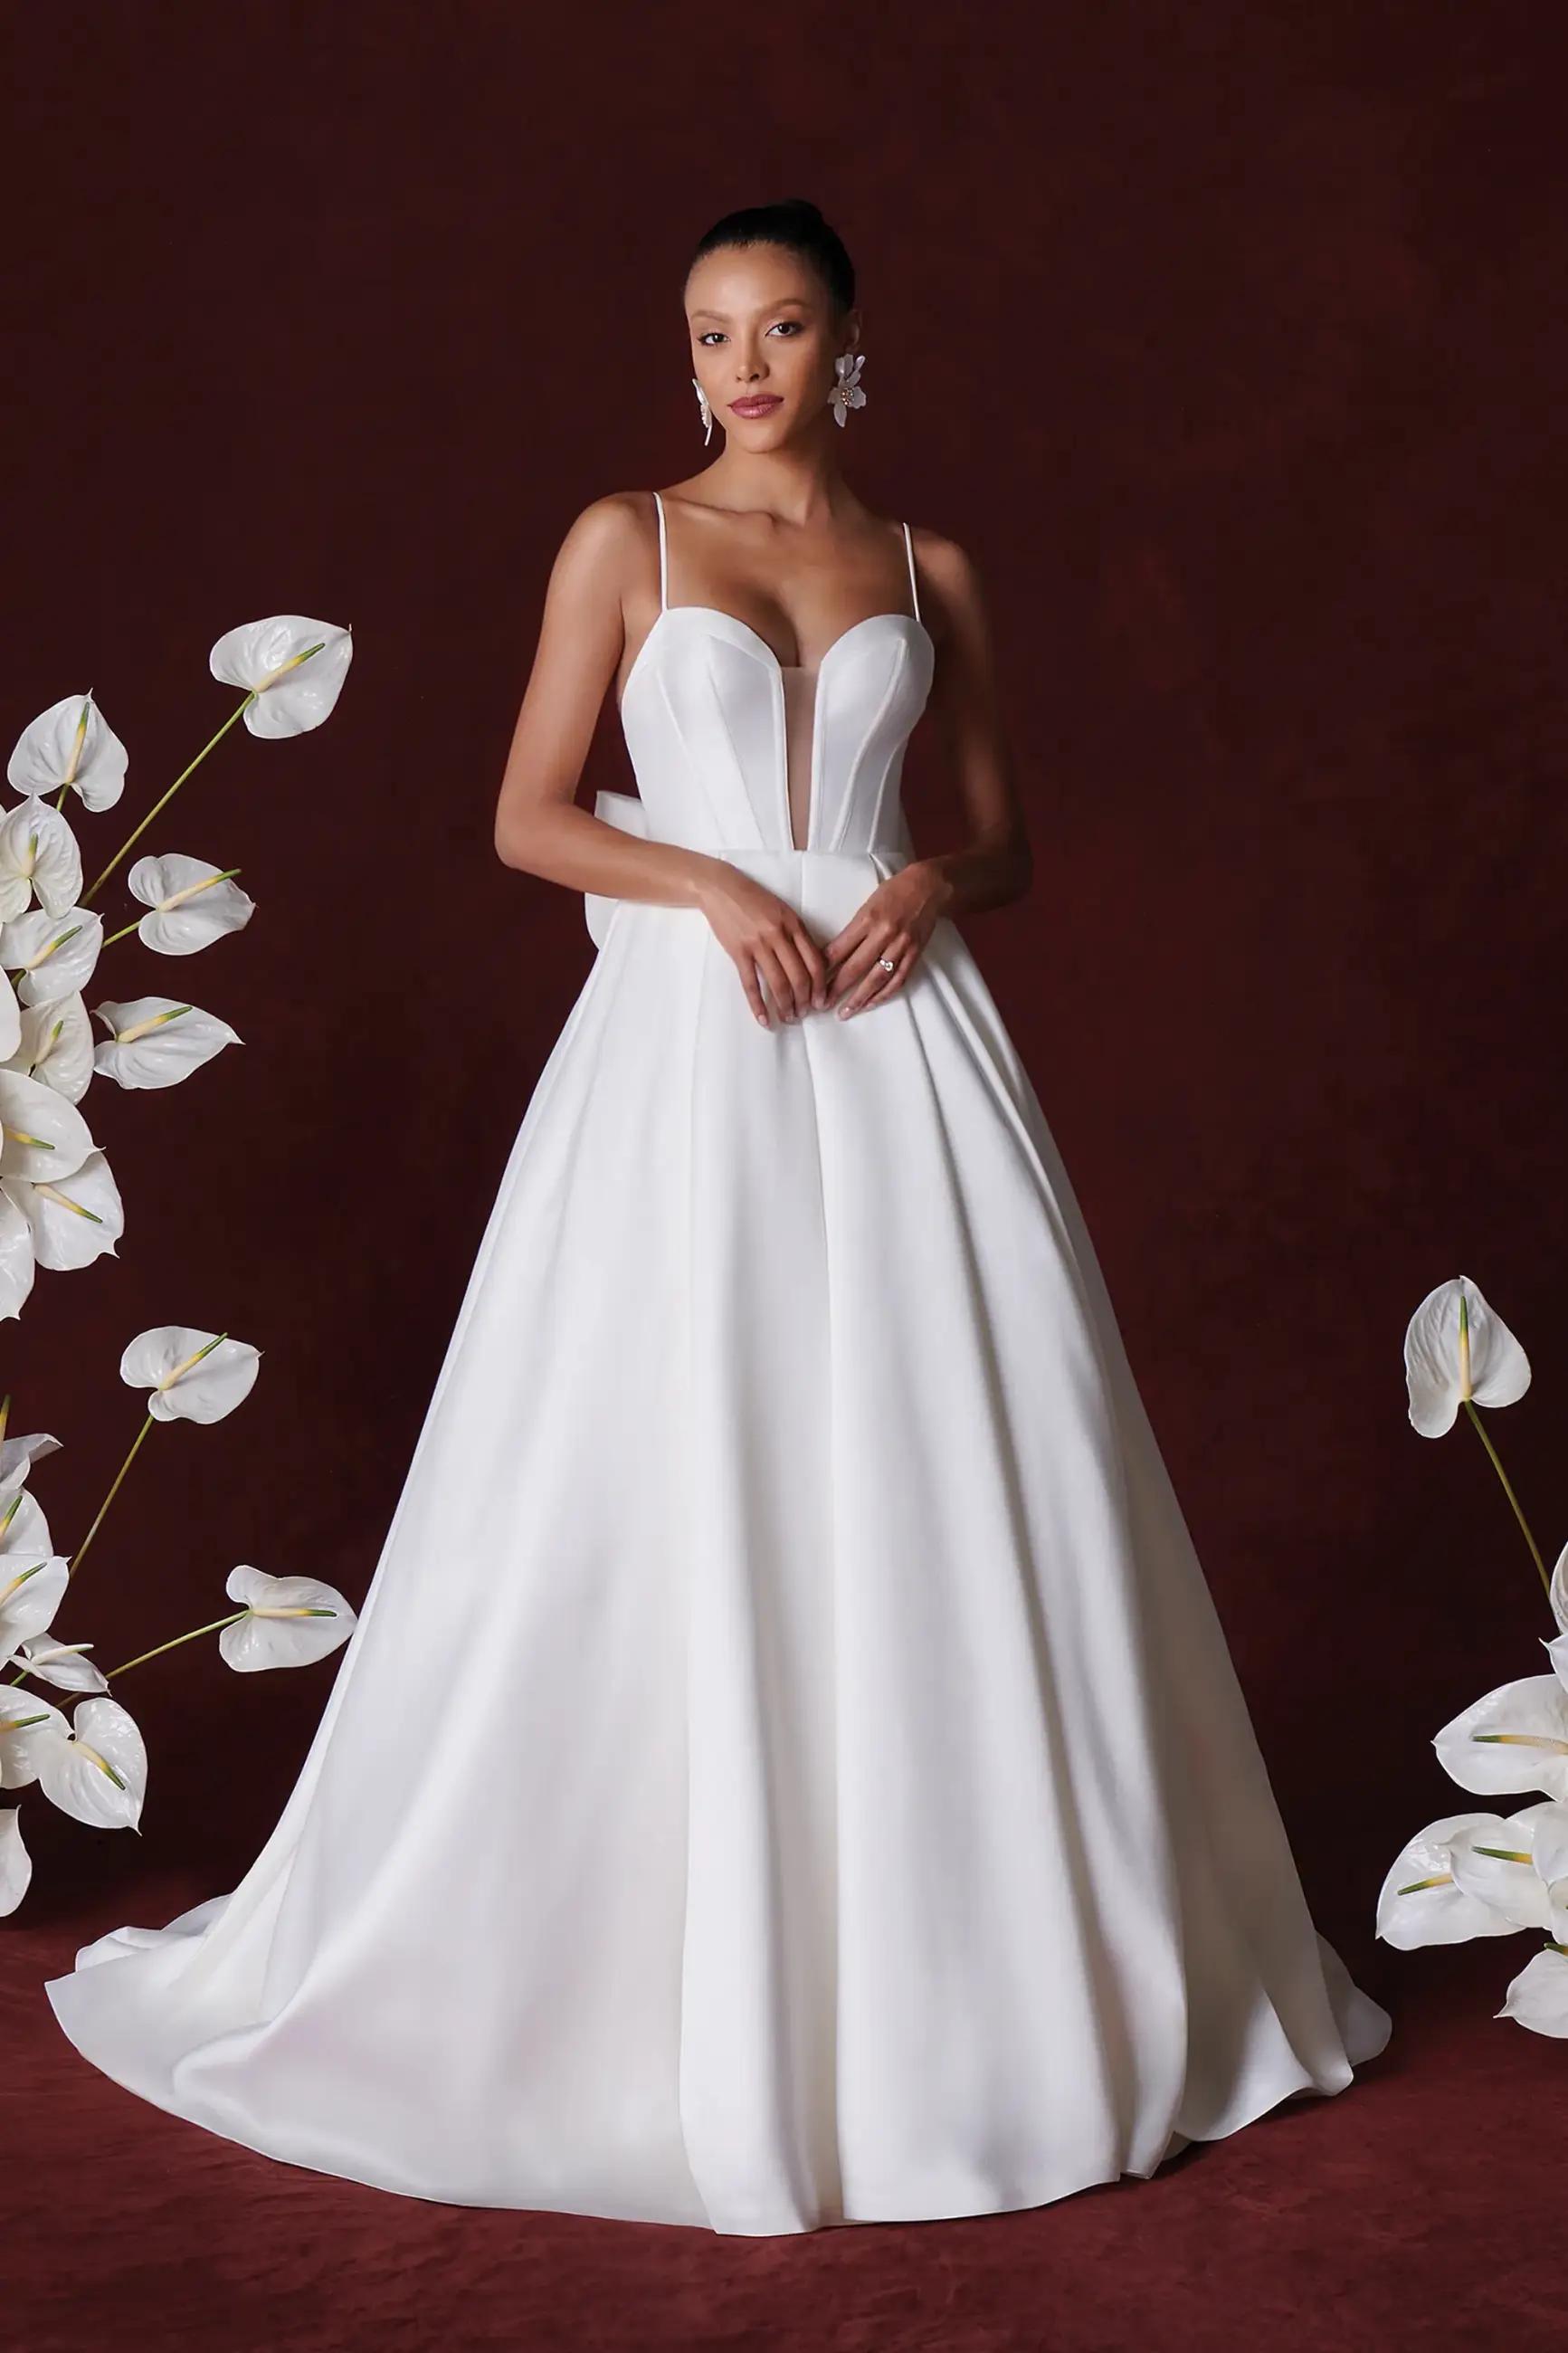 2024 Elegance: Finding the Perfect Bridal Gown for Your Dream Wedding Image